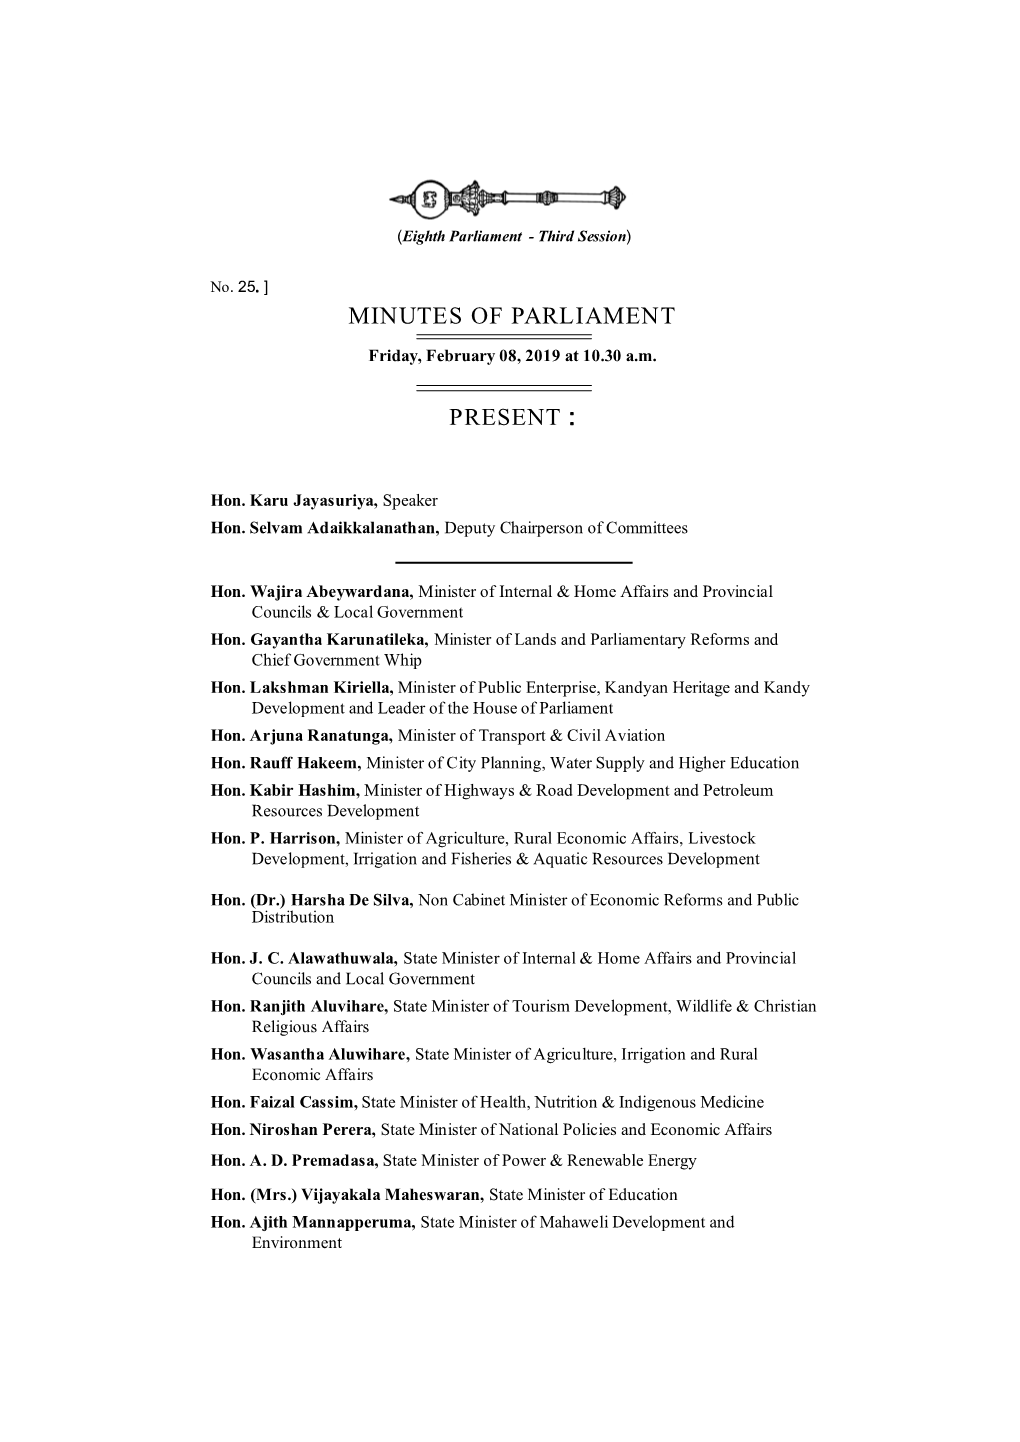 Minutes of Parliament for 08.02.2019